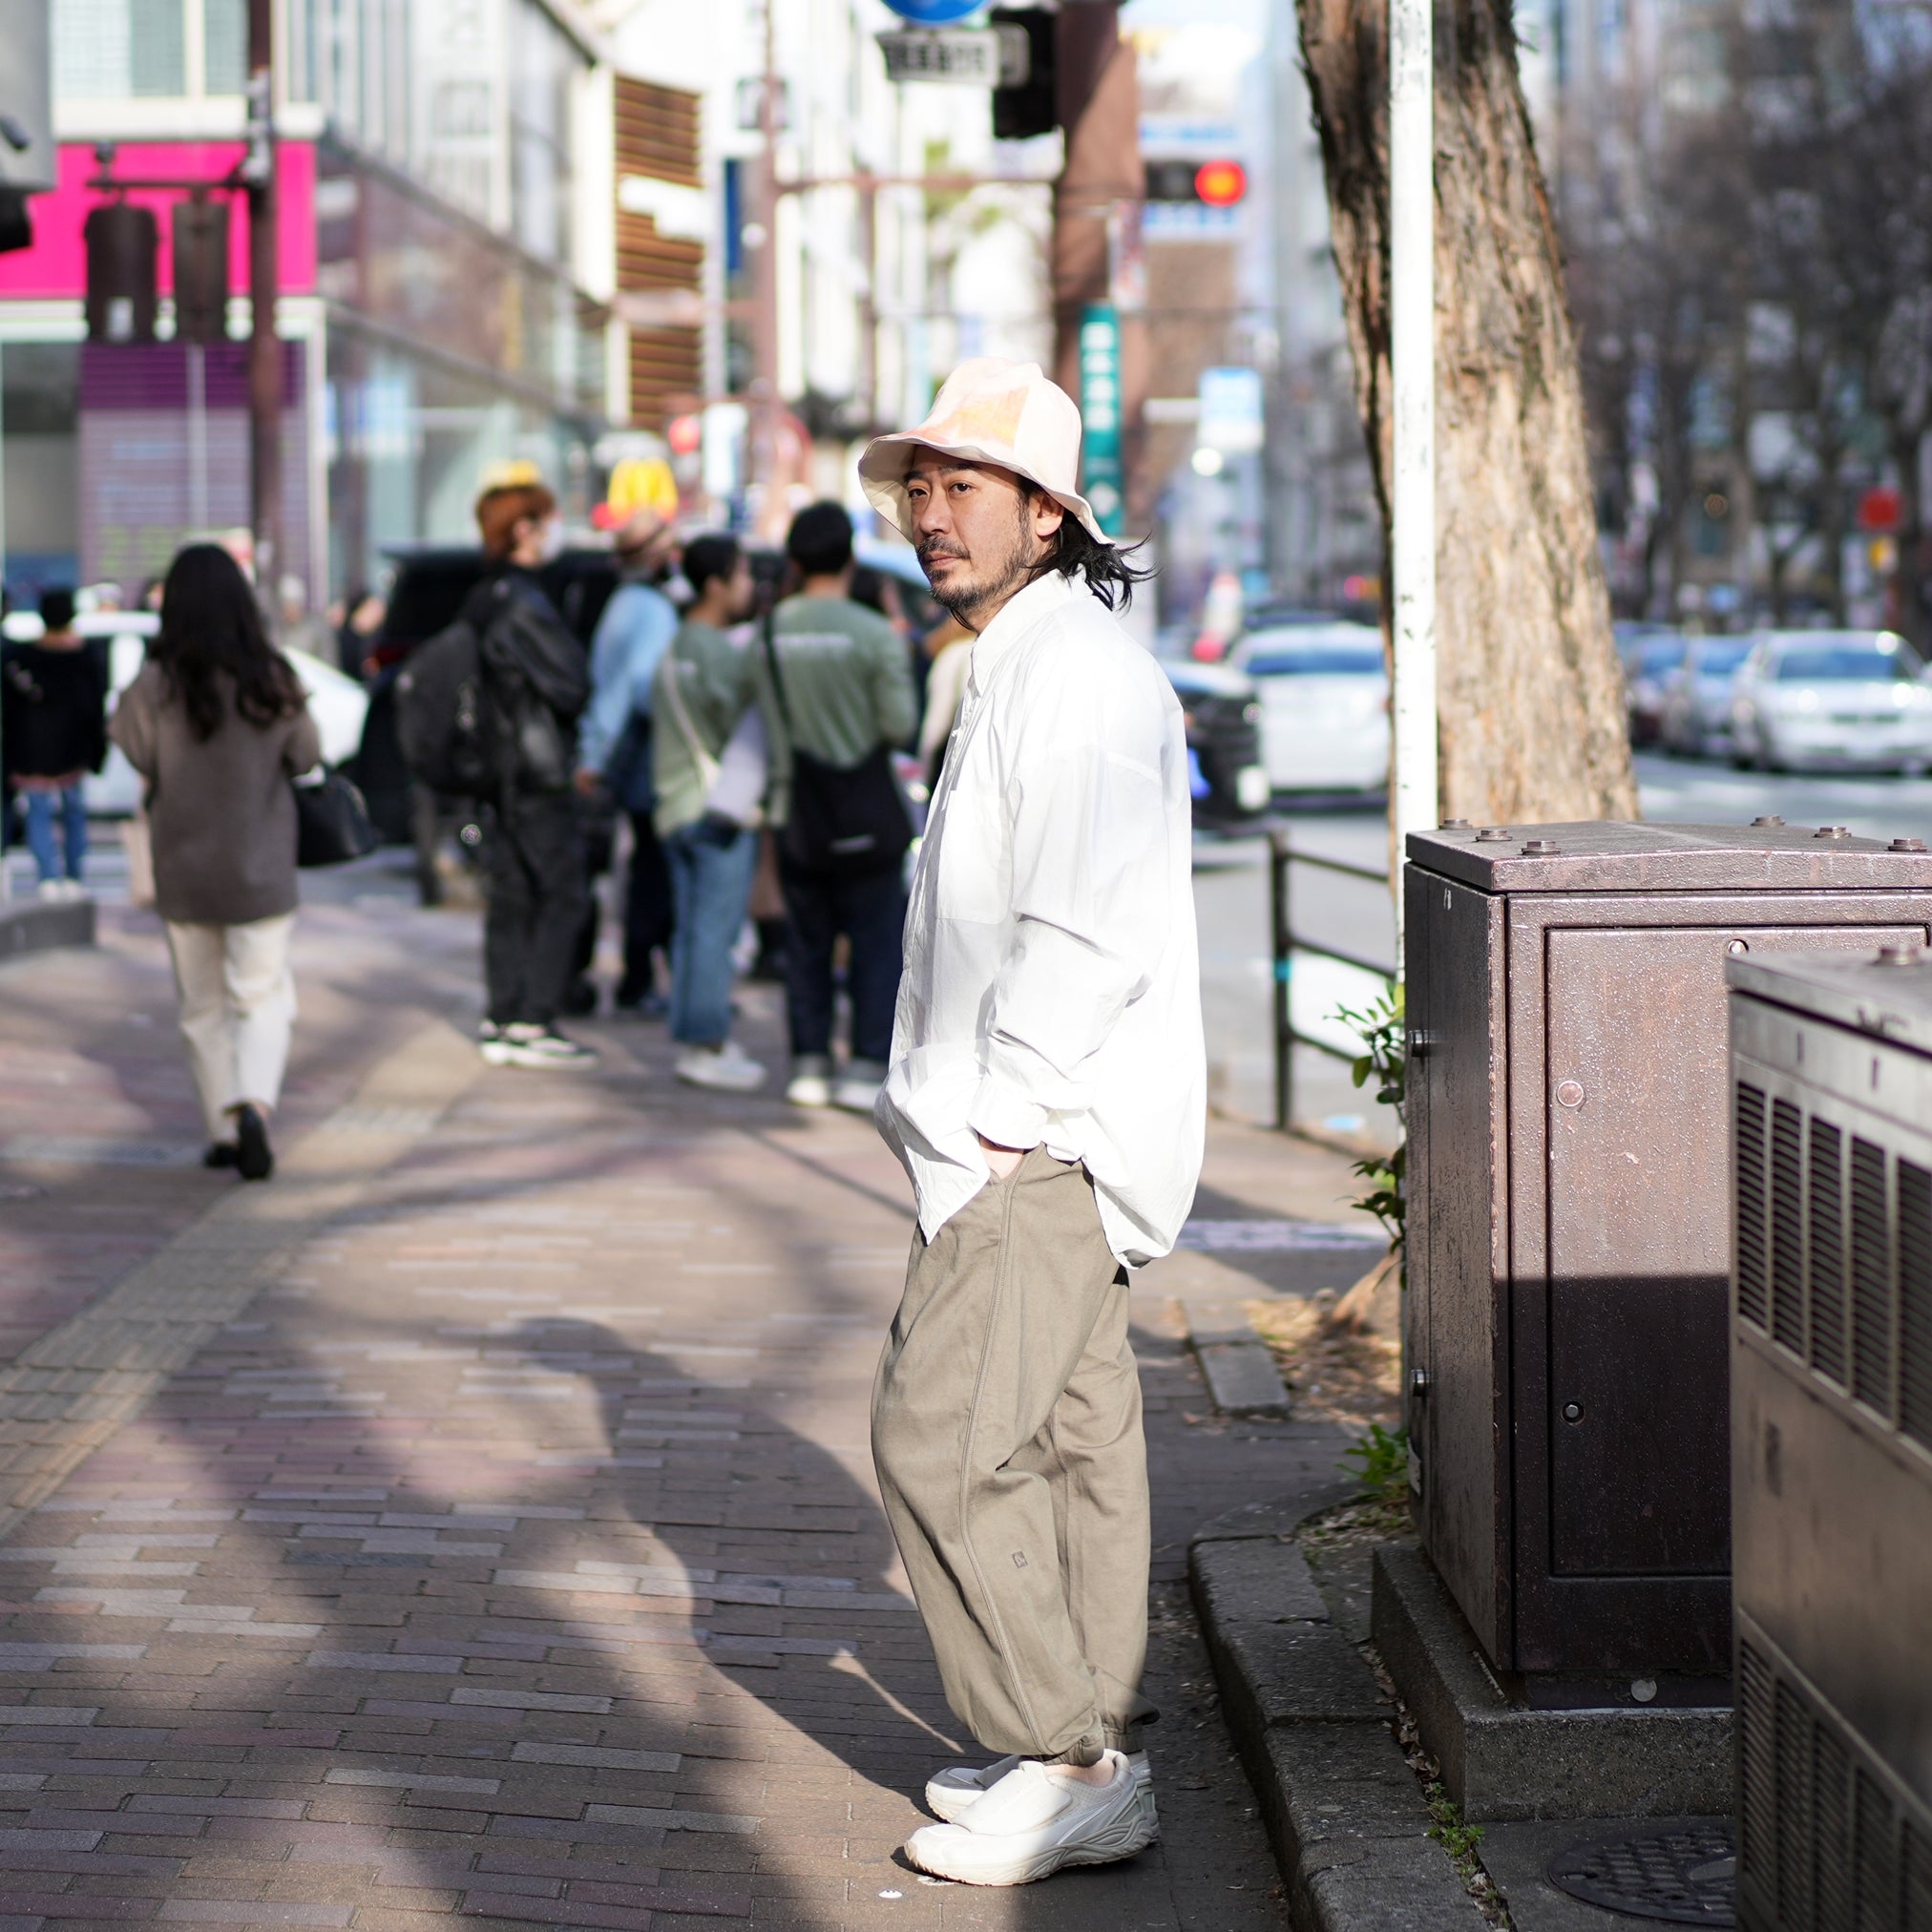 No:AM-2415005 | Name:10/-OE Jersey Pants | Color:Blue/Khaki【ARMYTWILL_アーミーツイル】